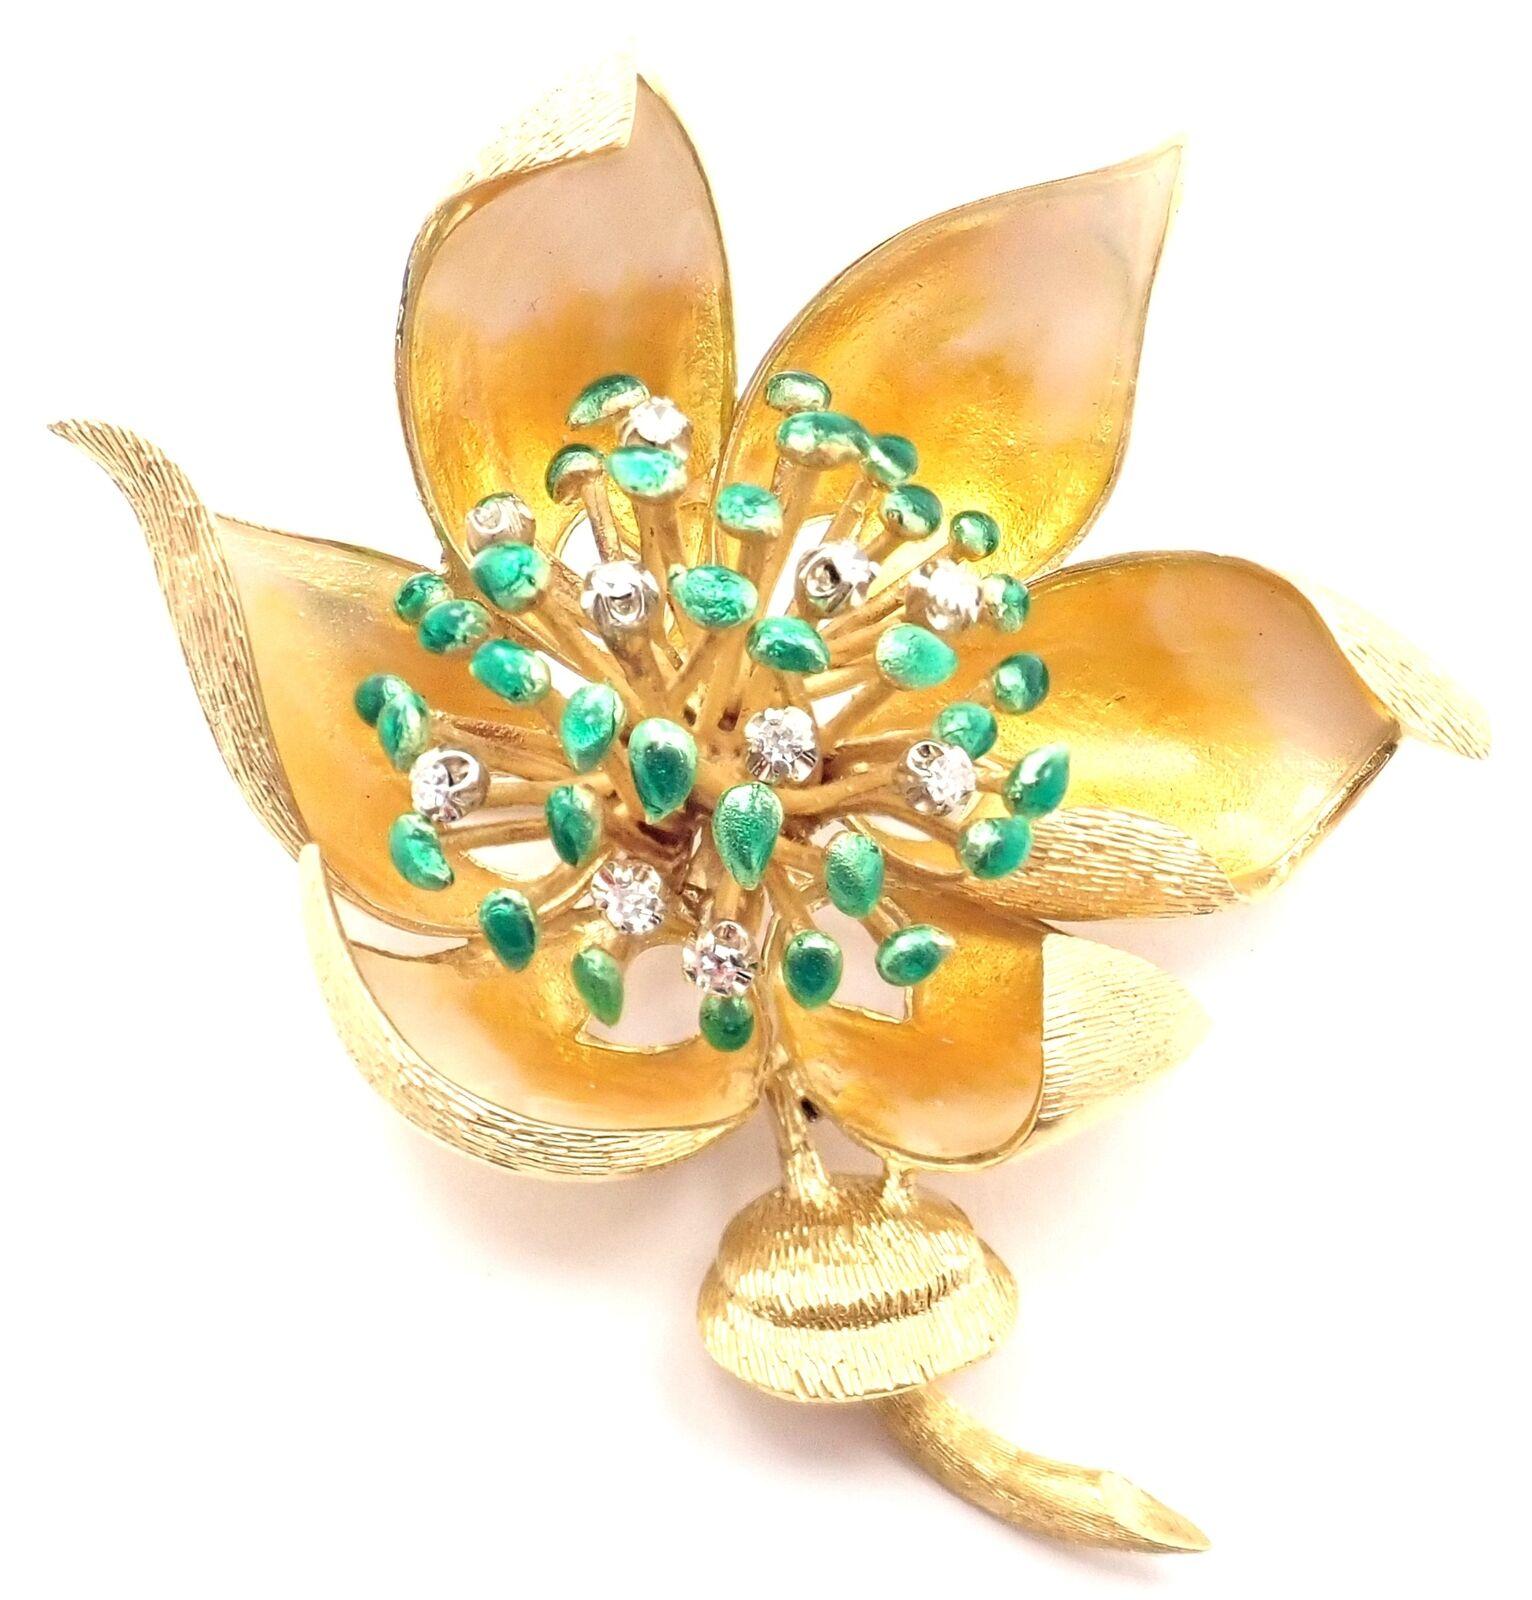 18k Yellow Gold Vintage Diamond  Large Pin Brooch by Tiffany & Co. 
With 10 round diamonds
Enamel
Details: 
Measurements: 2.5